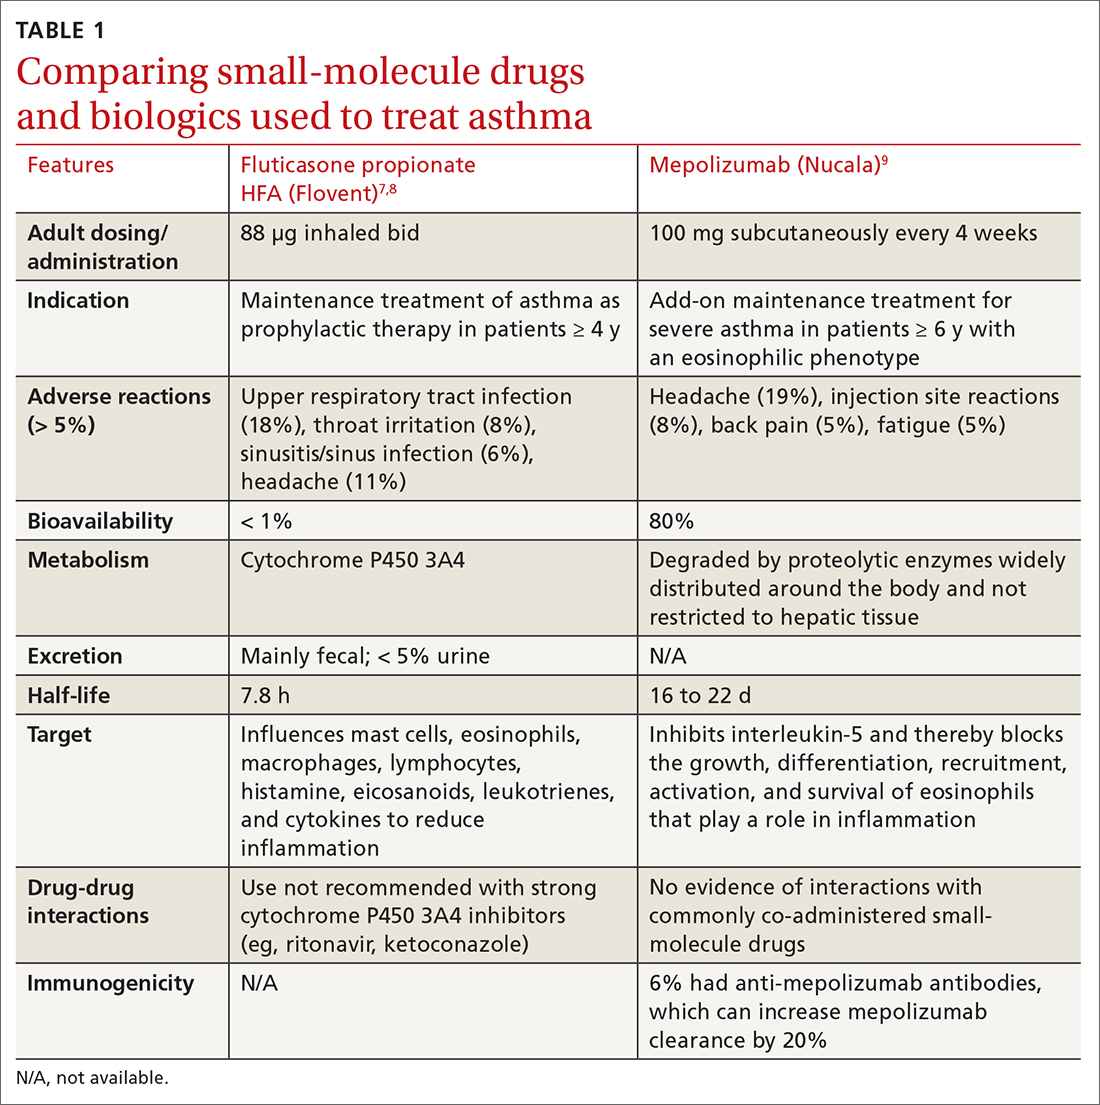 Comparing small-molecule drugs and biologics used to treat asthma